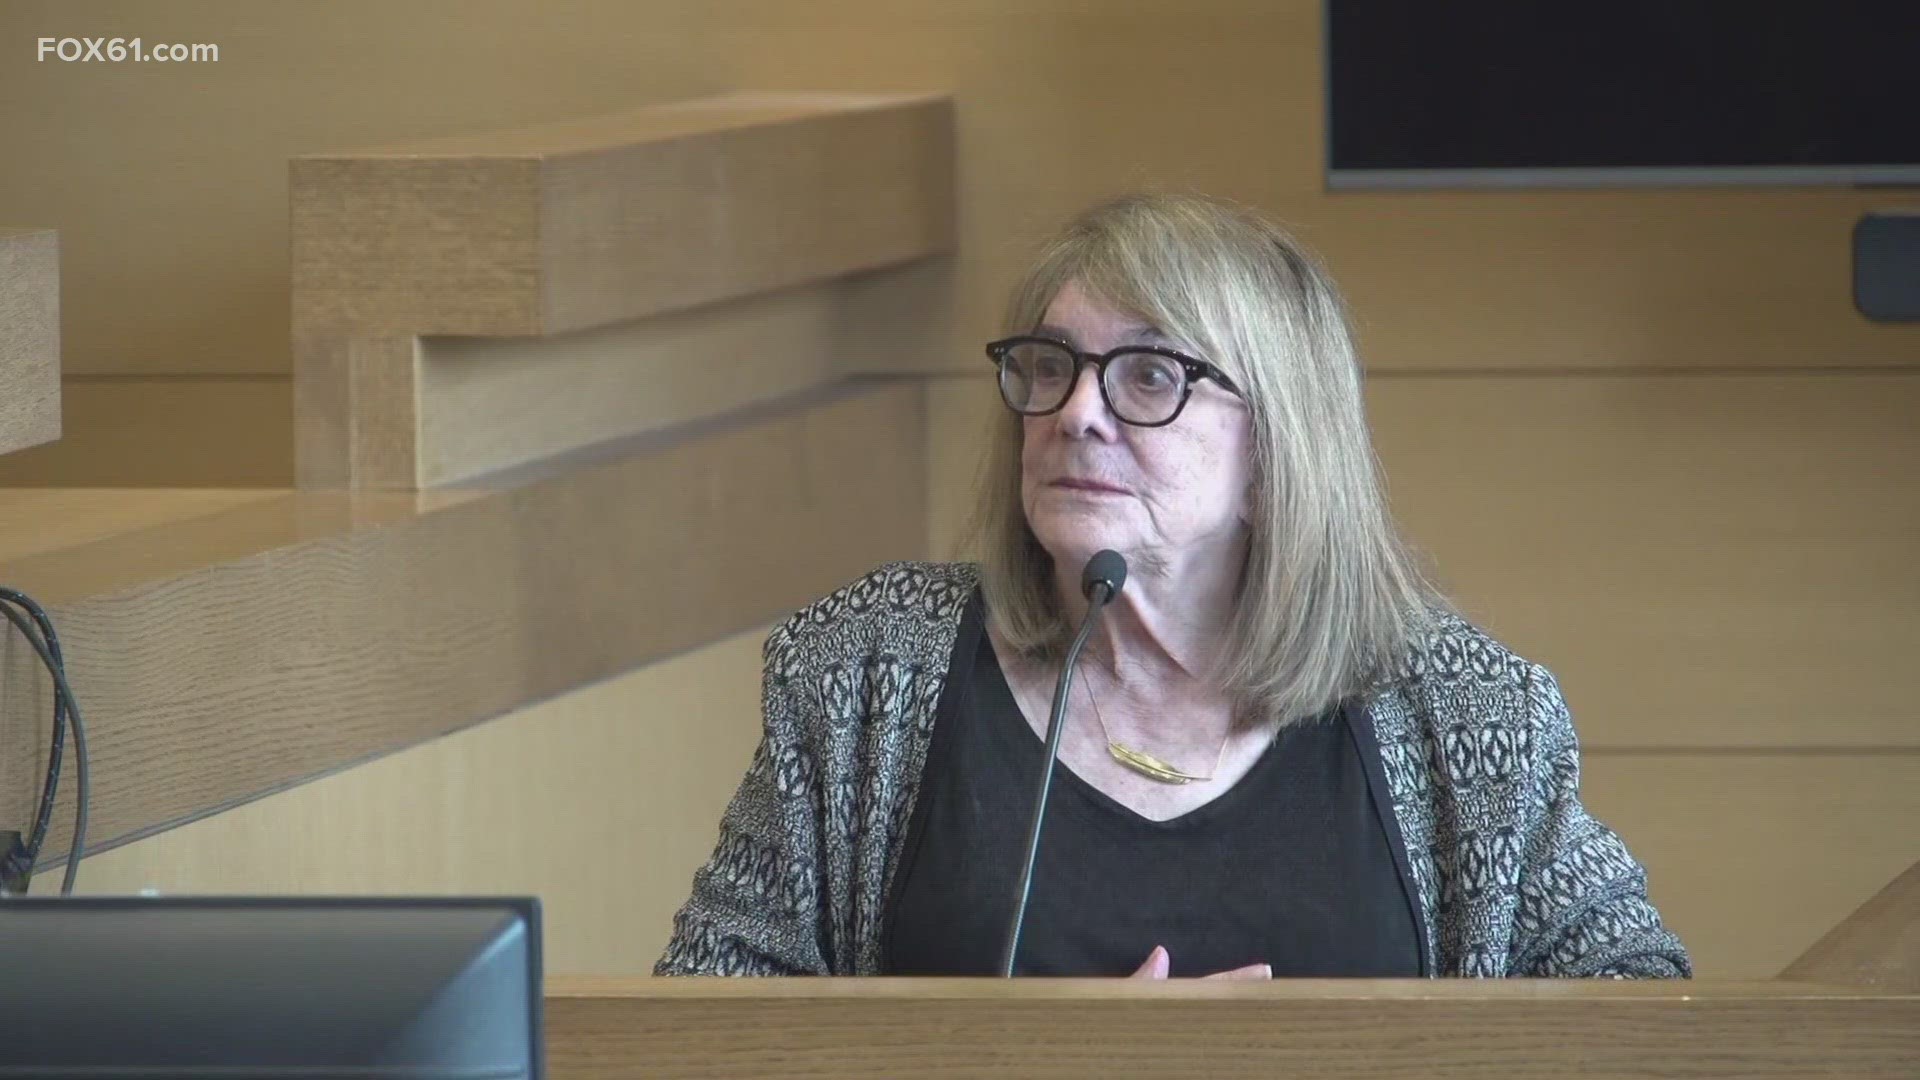 The UC Irvine professor explained the basics of memory psychology and some relevant studies she oversaw to the jury.